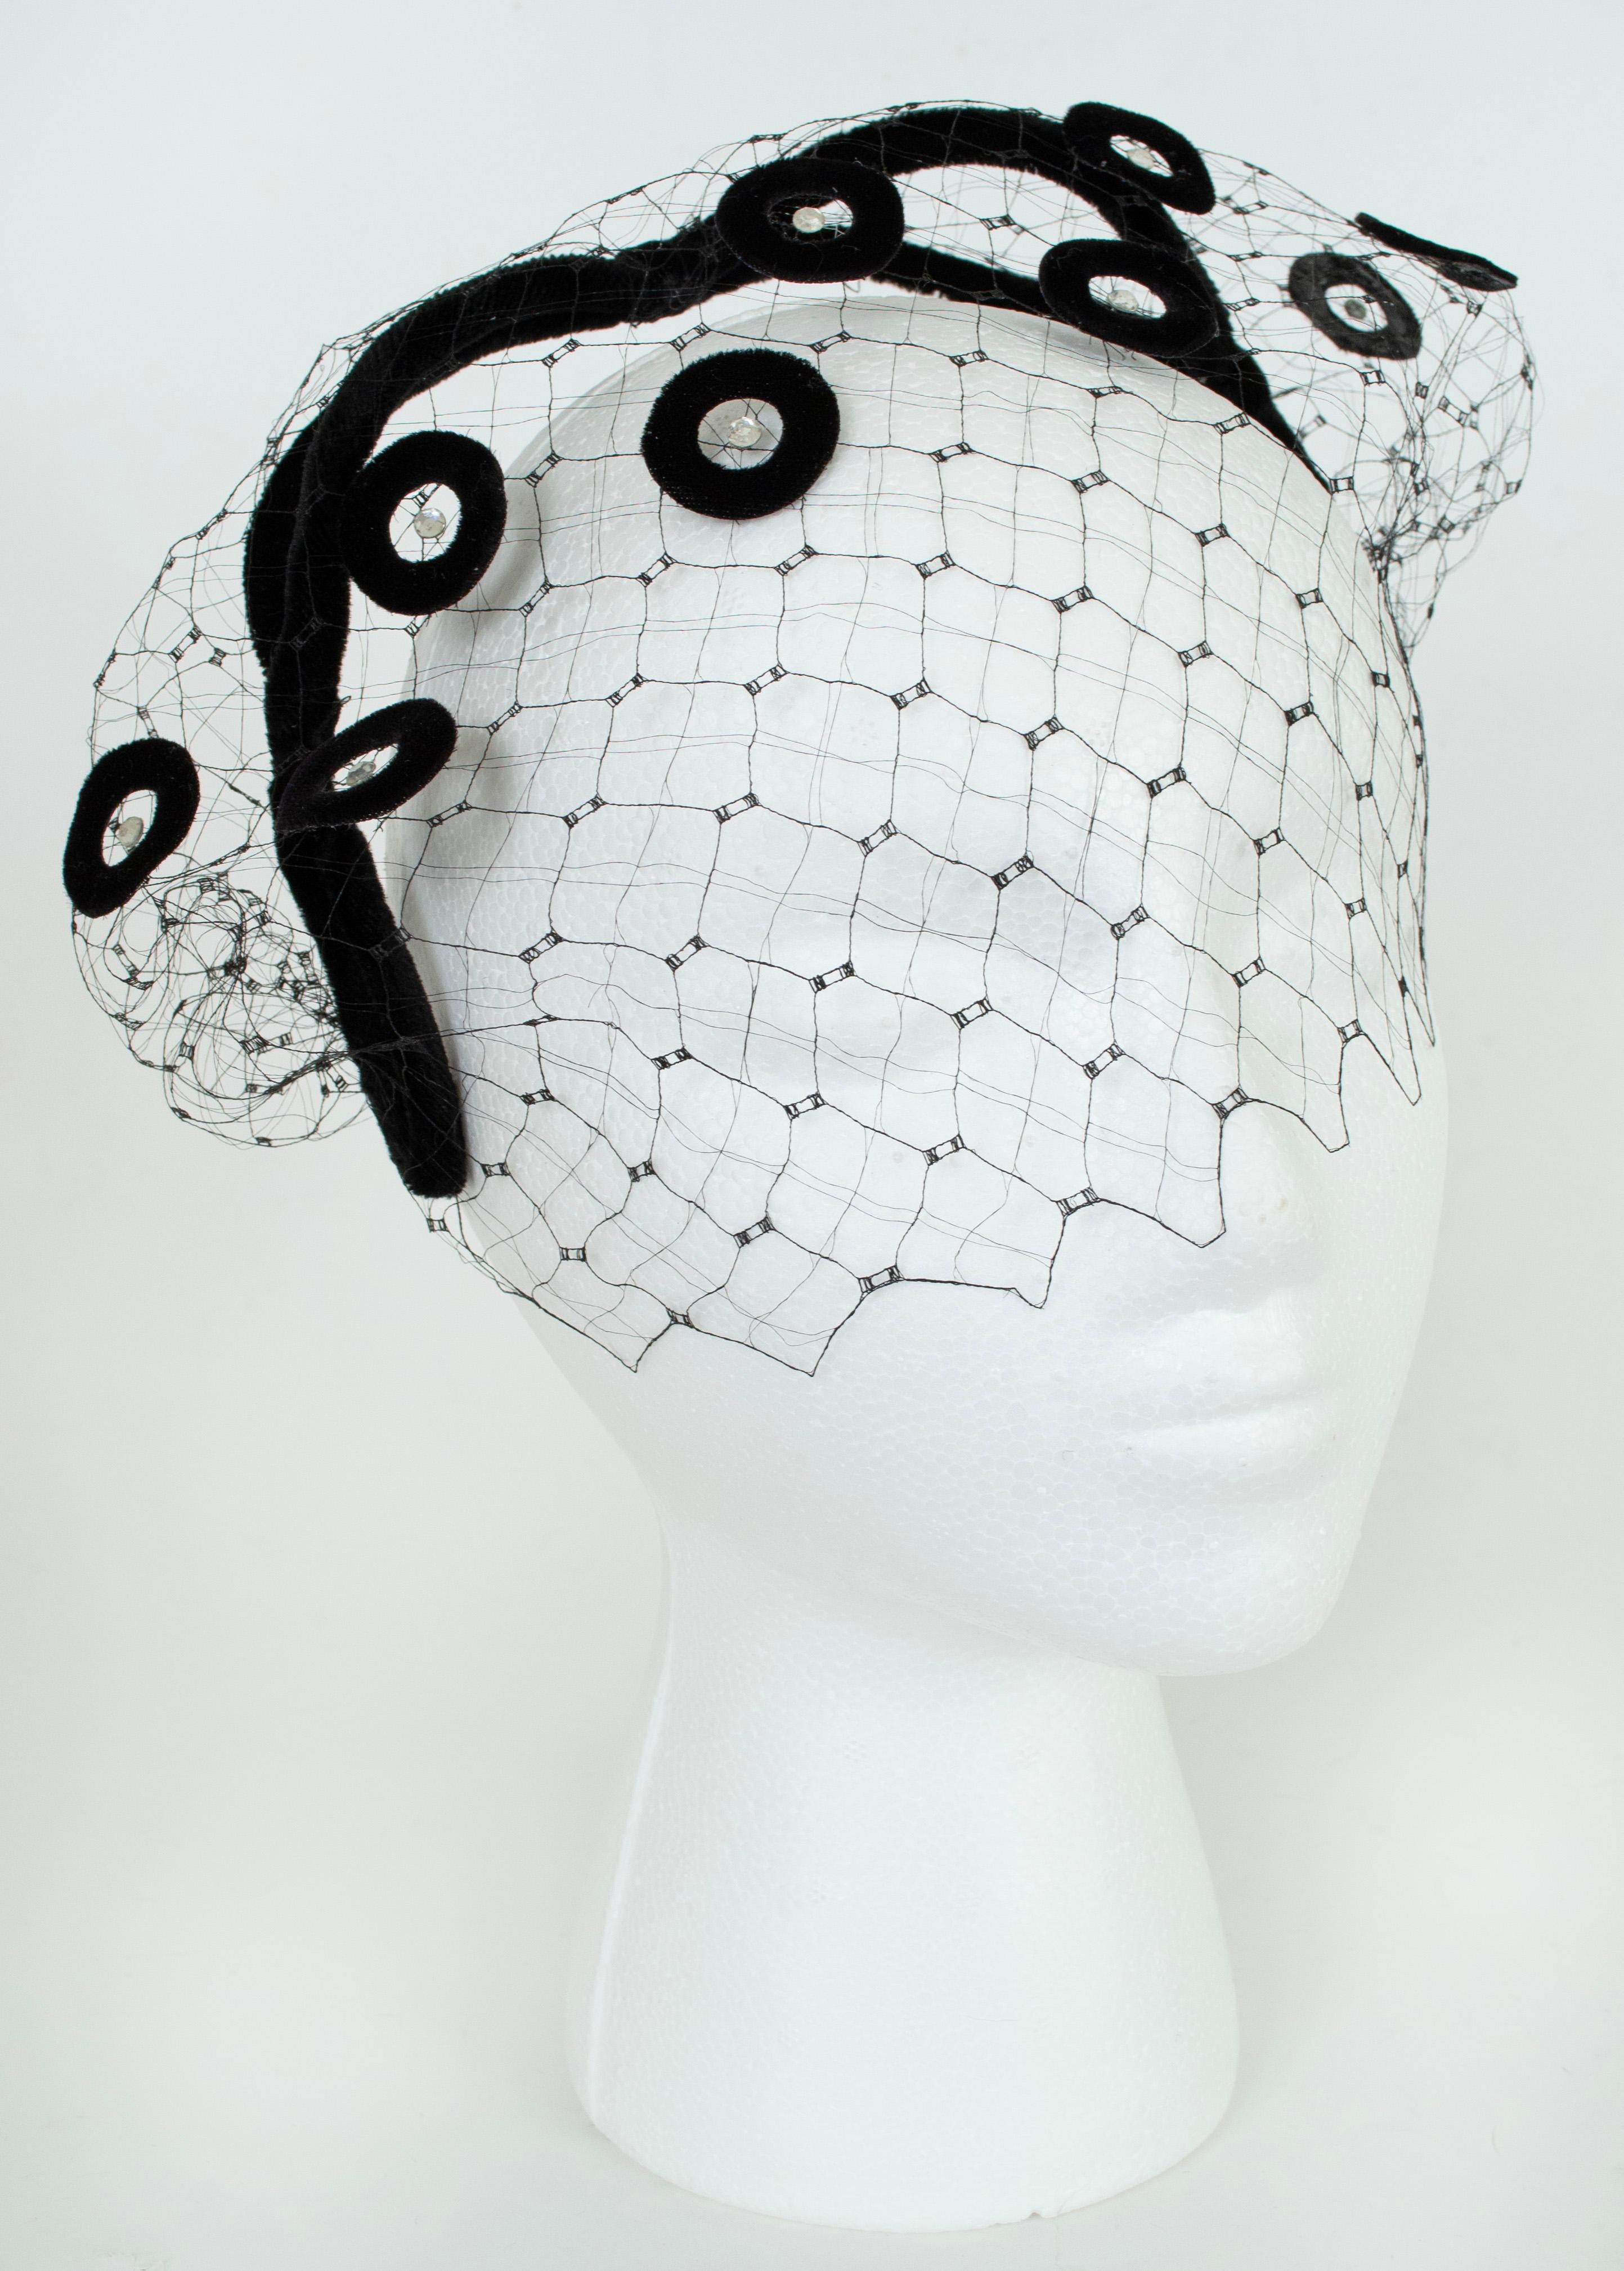 The mystery of a veil, the weightlessness of a fascinator, and the playfulness of Schiaparelli style appliqués in a single accessory. Next stop: a Henry Clarke portrait.

Black silk velvet openwork headband fascinator and veil studded with circular